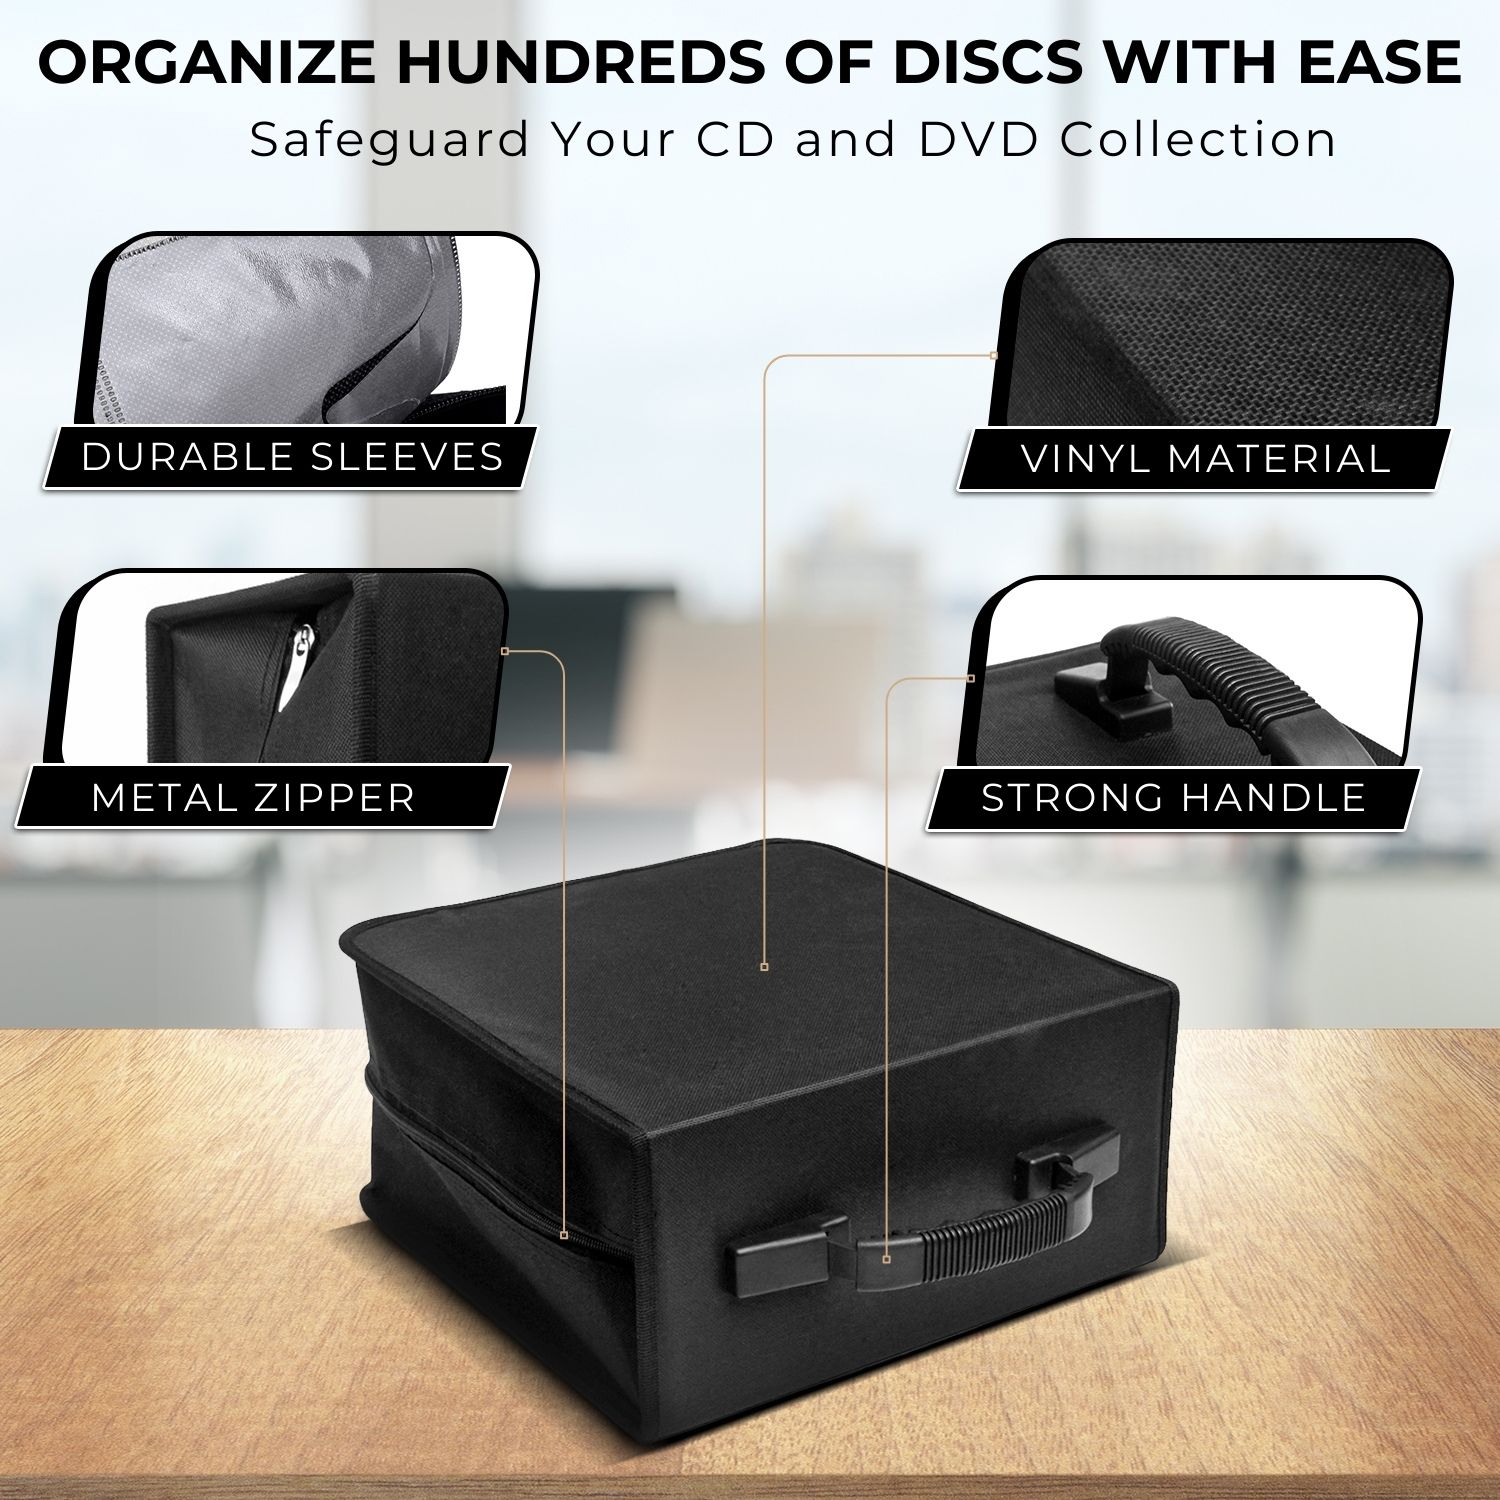 Portable CD Organizer Binder - Features a sturdy carrying handle, this DVD suitcase or CD carrying case allows you to grab and toss it in your car for a long road trip; secured and zippered to ensure your disks stay in the pack while traveling